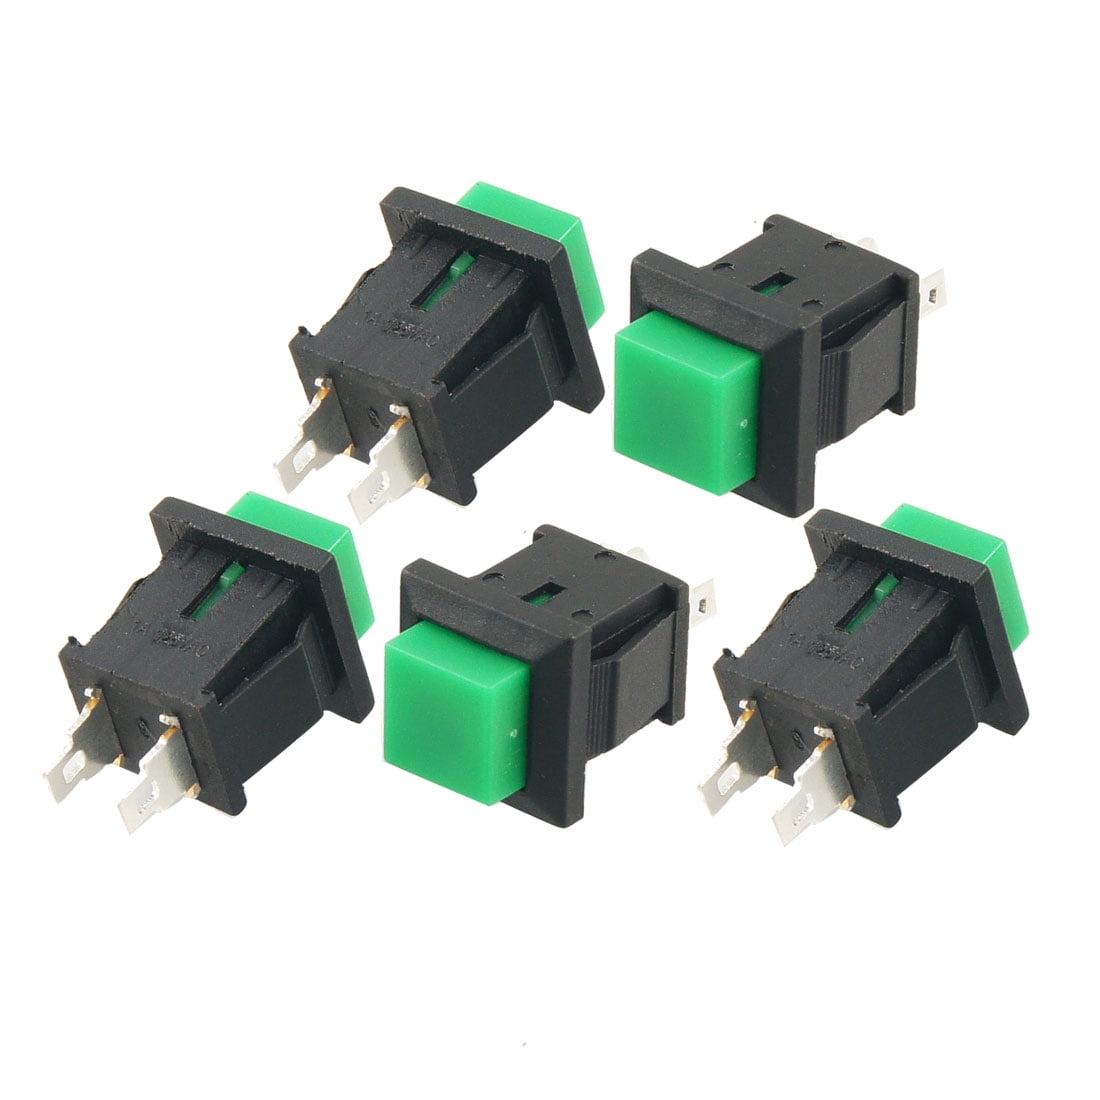 5x Green Momentary Square Push Button Switch Spst 125v 1a